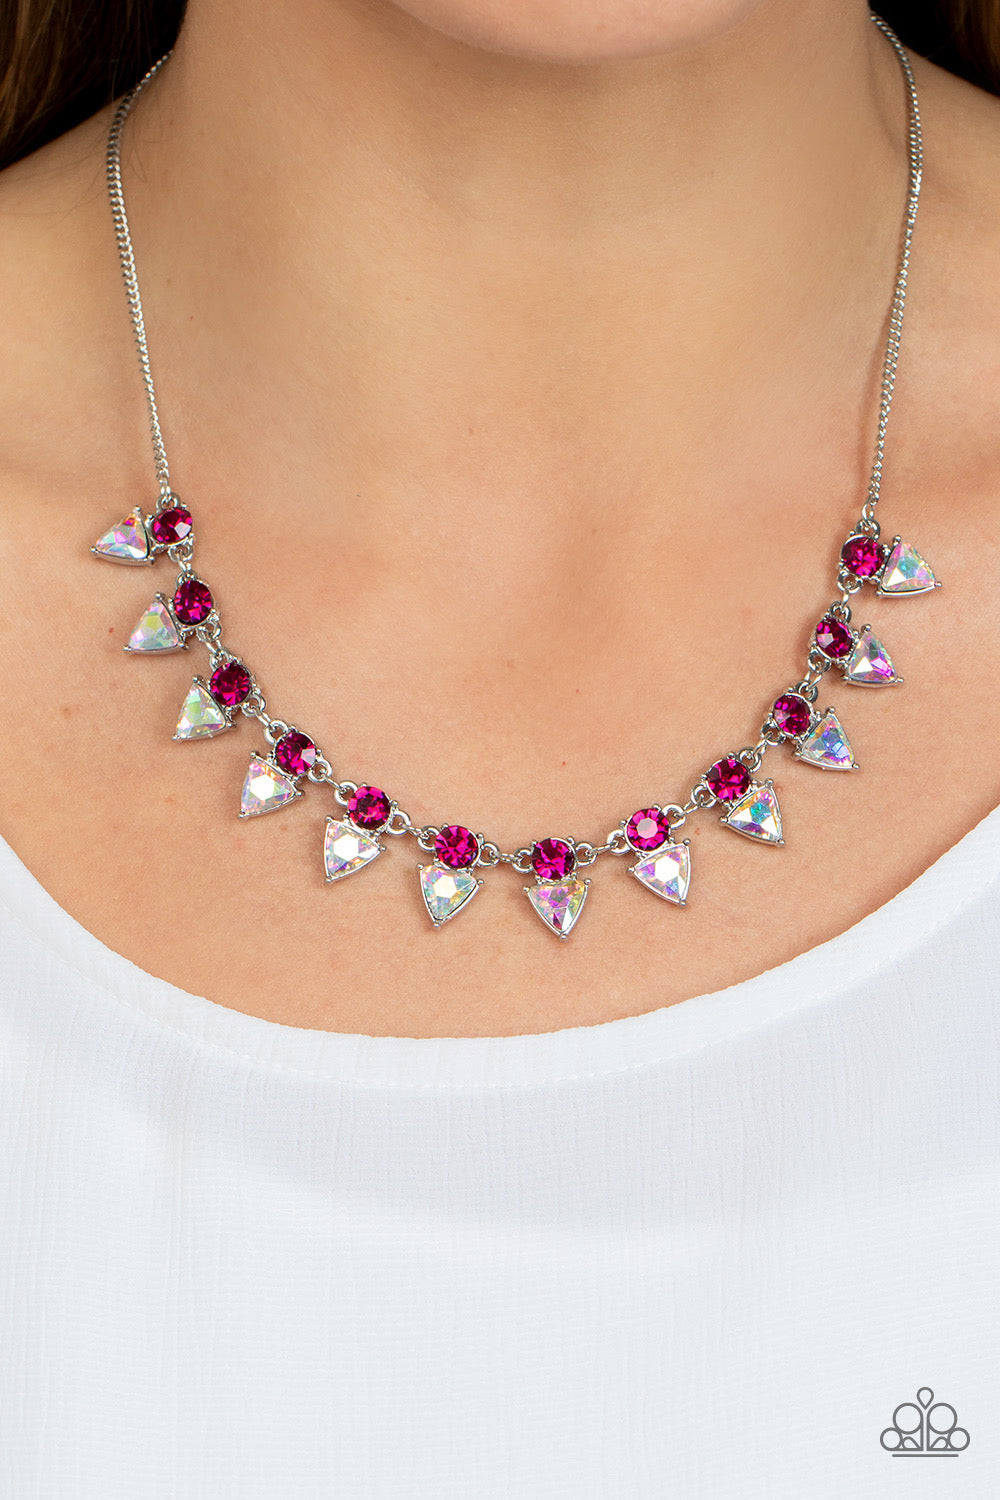 Paparazzi Razor-Sharp Refinement - Pink Necklace - A Finishing Touch Jewelry